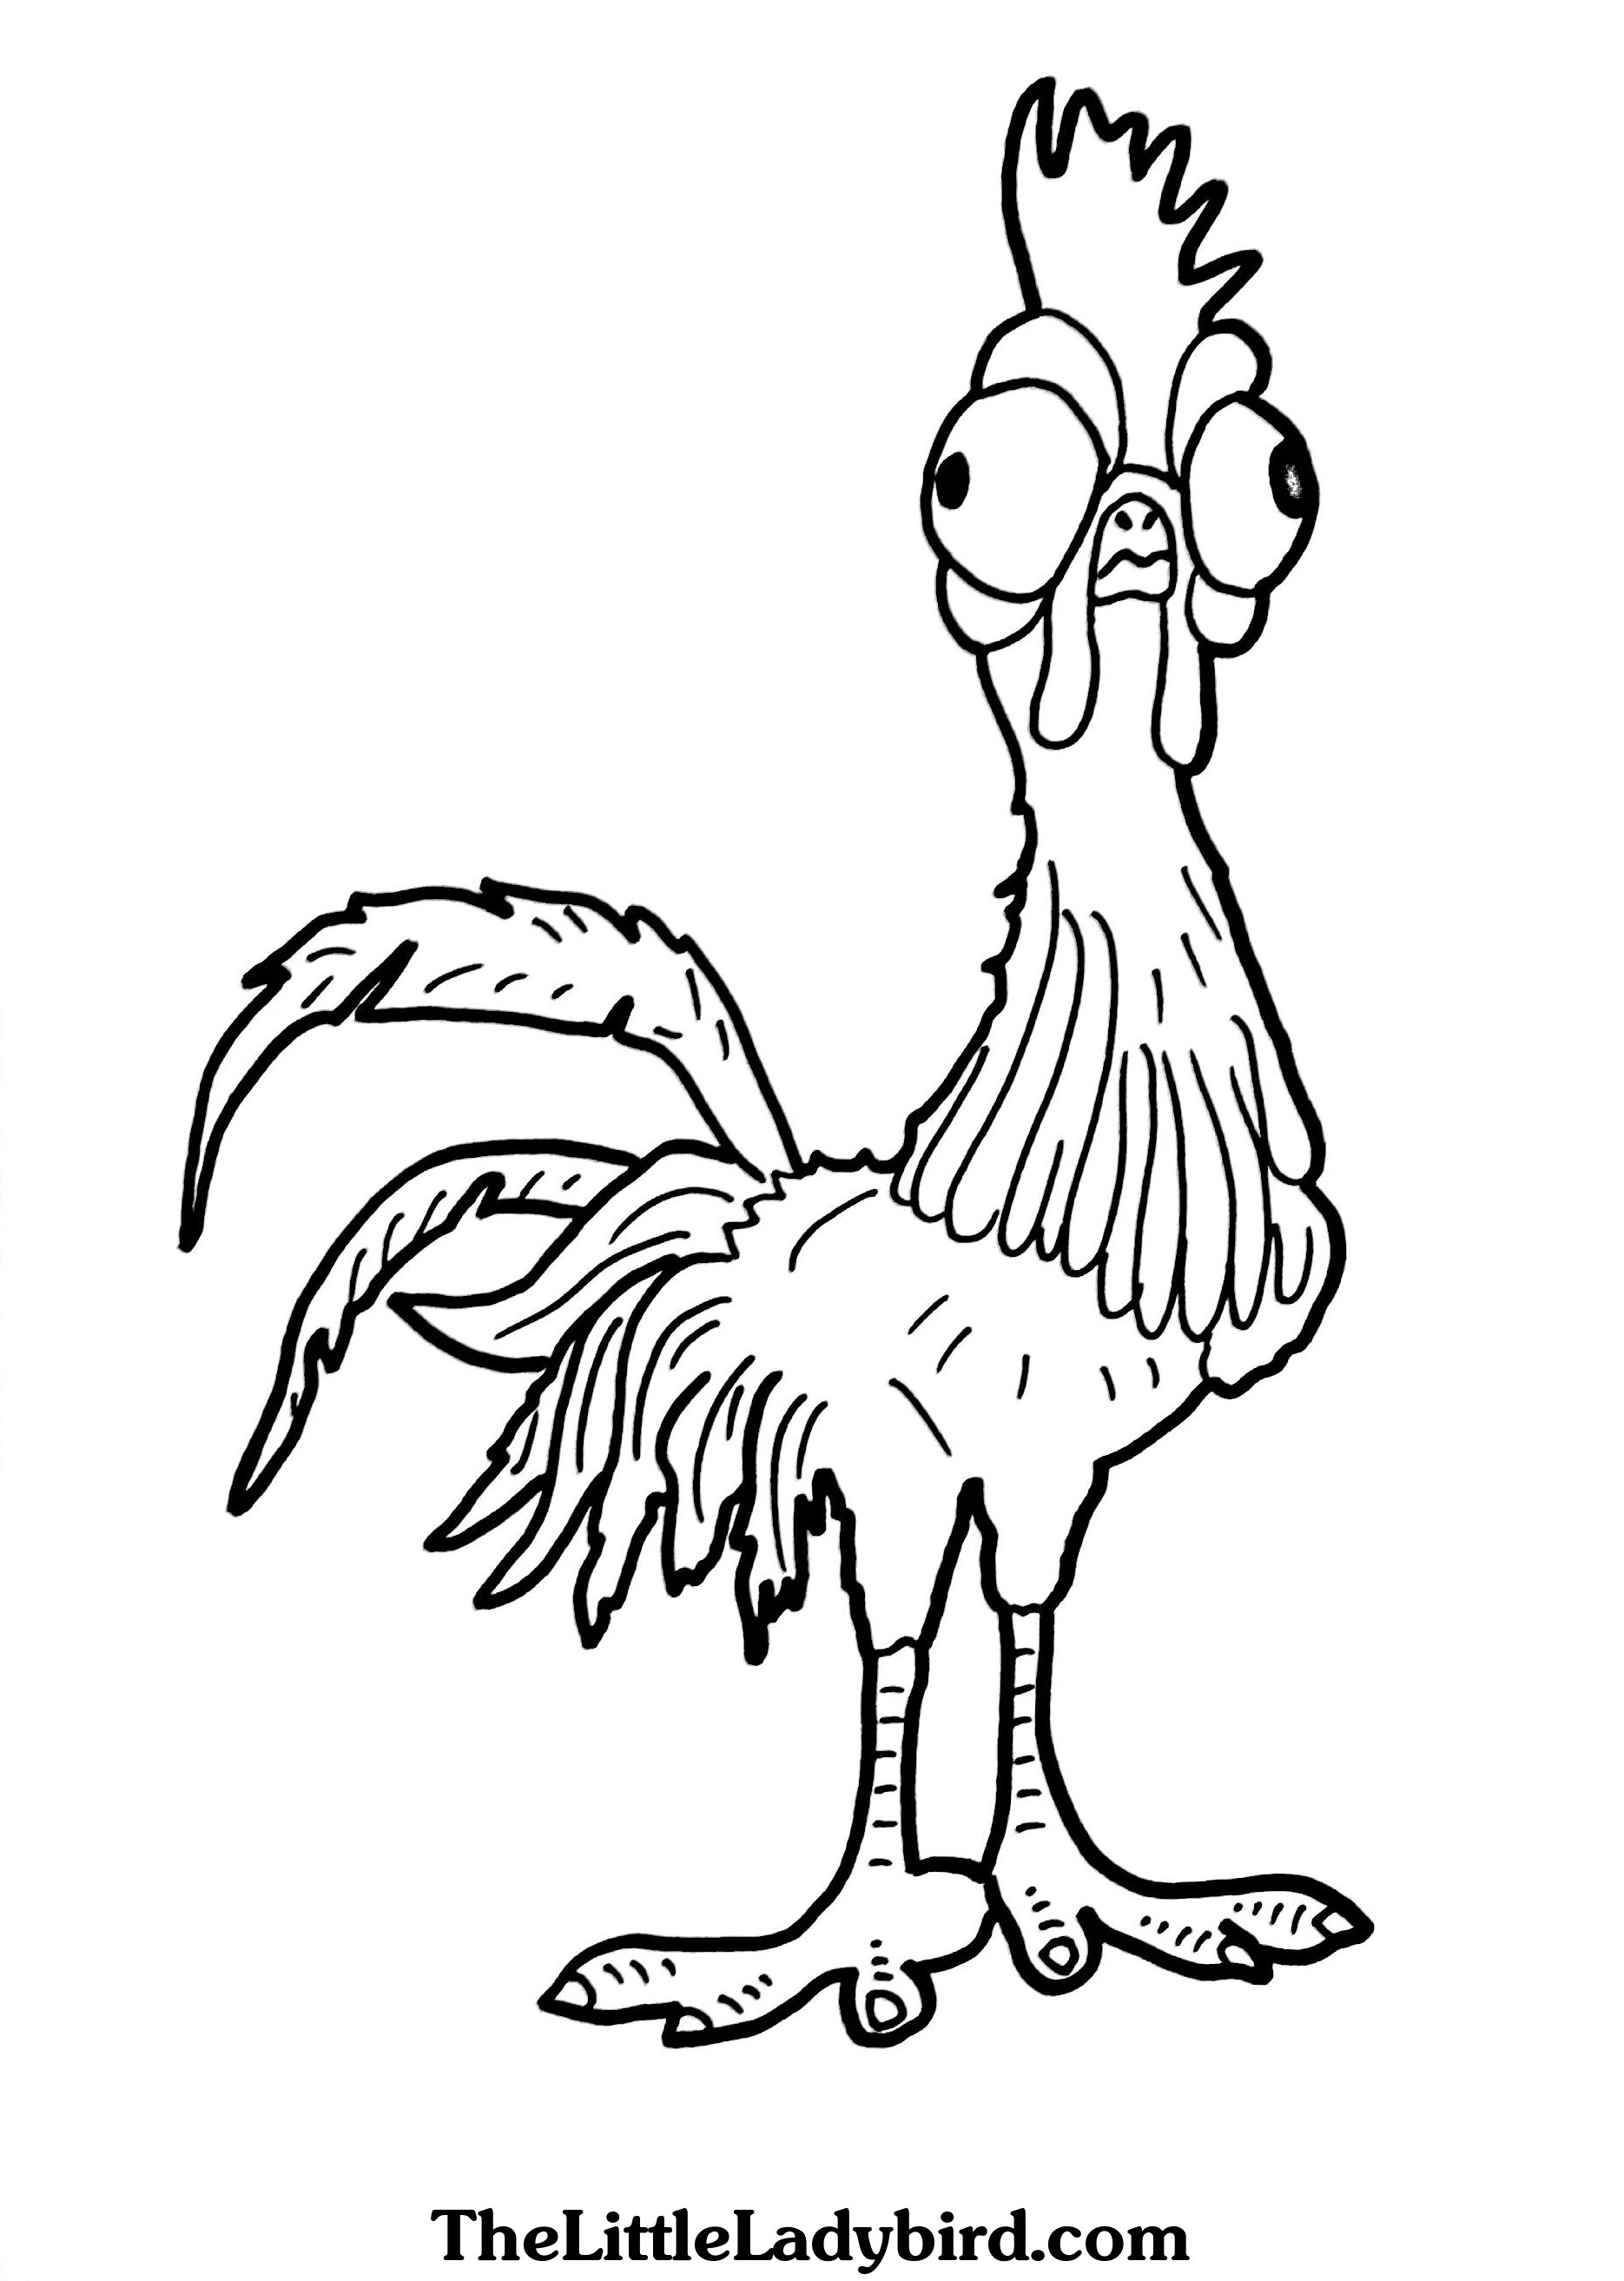 Free Heihei Rooster From Moana Coloring Page | Thelittleladybird - Free Printable Pictures Of Roosters